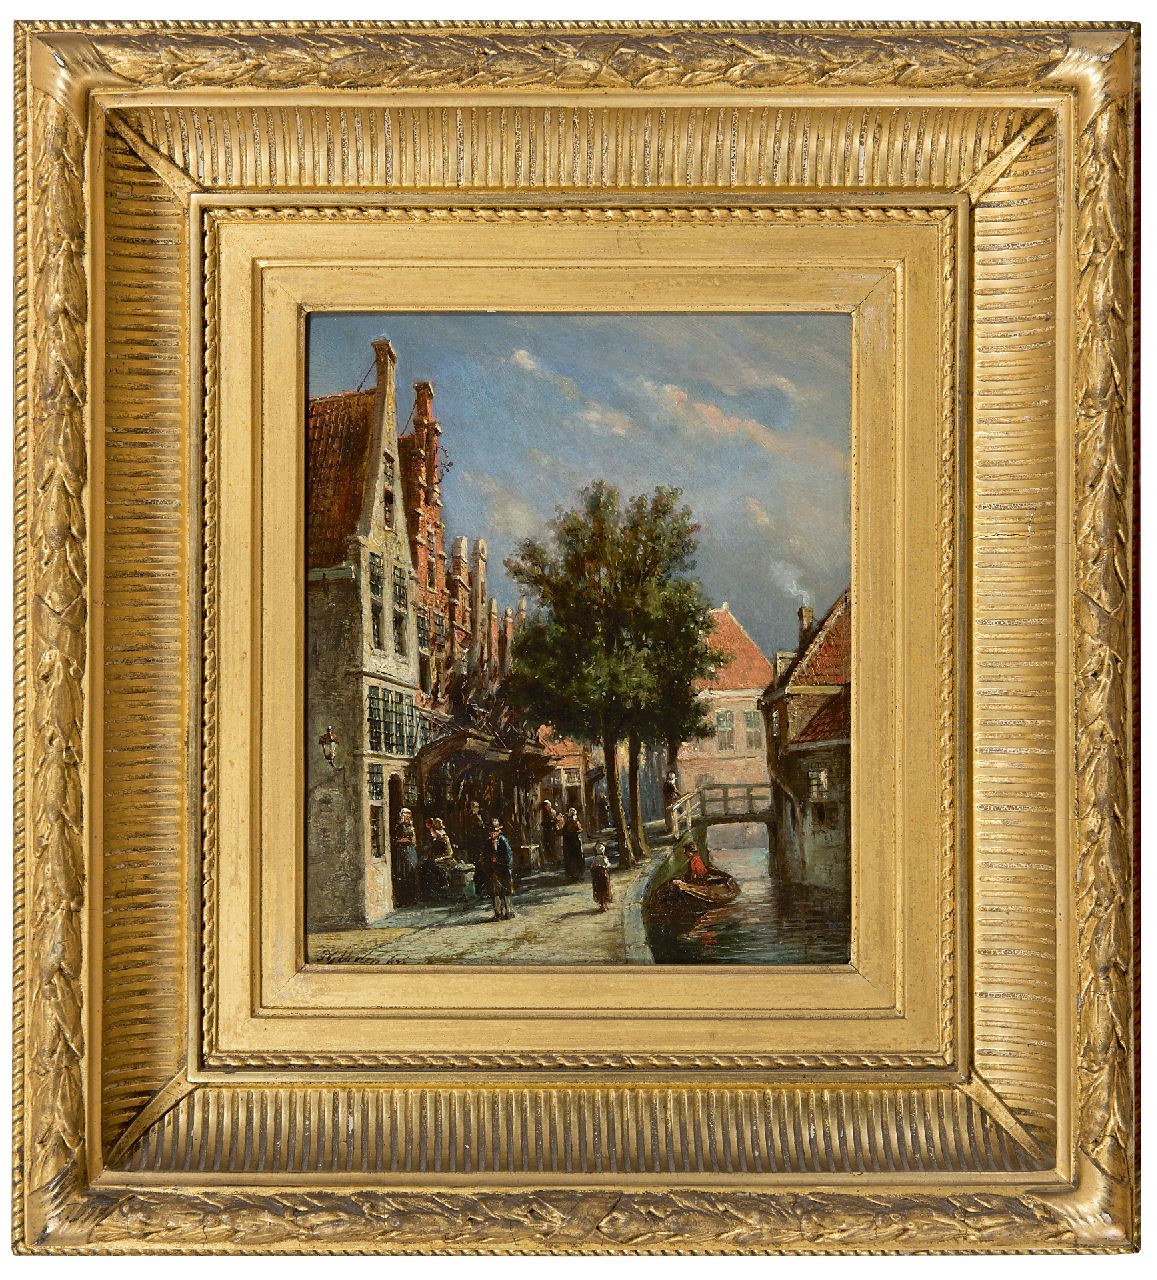 Vertin P.G.  | Petrus Gerardus Vertin, A Dutch canal scene, oil on panel 21.9 x 18.0 cm, signed l.l. and dated '73